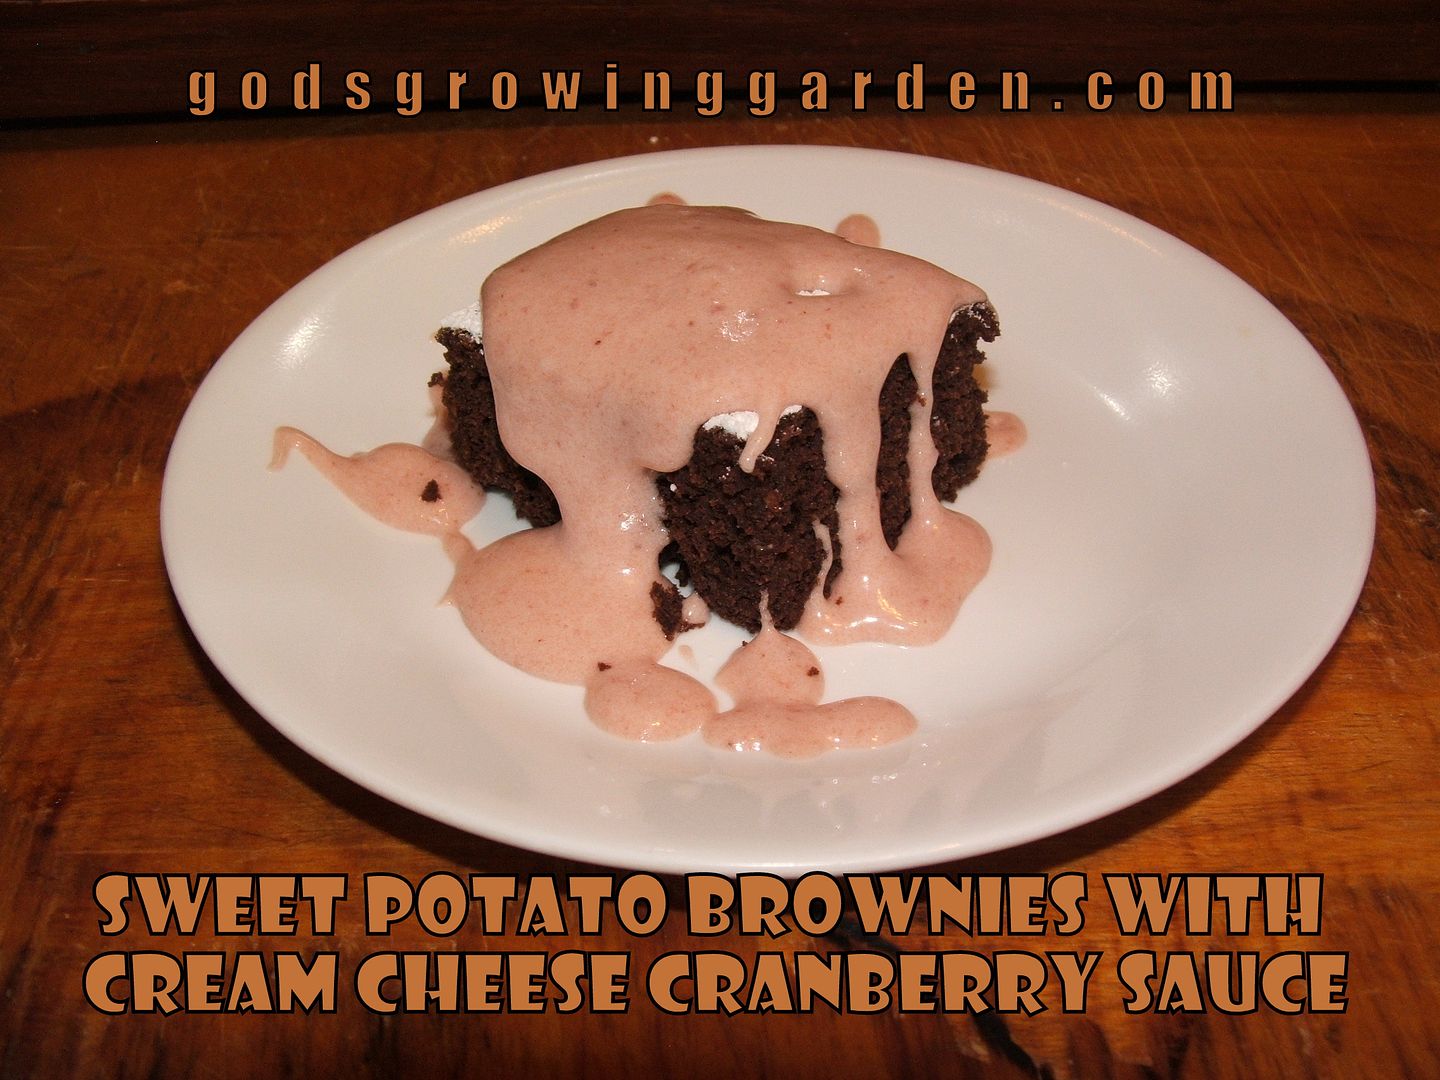 Sweet Potato Brownies by Angie Ouellette-Tower for godsgrowinggarden.com photo 010_zps83c2f98b.jpg